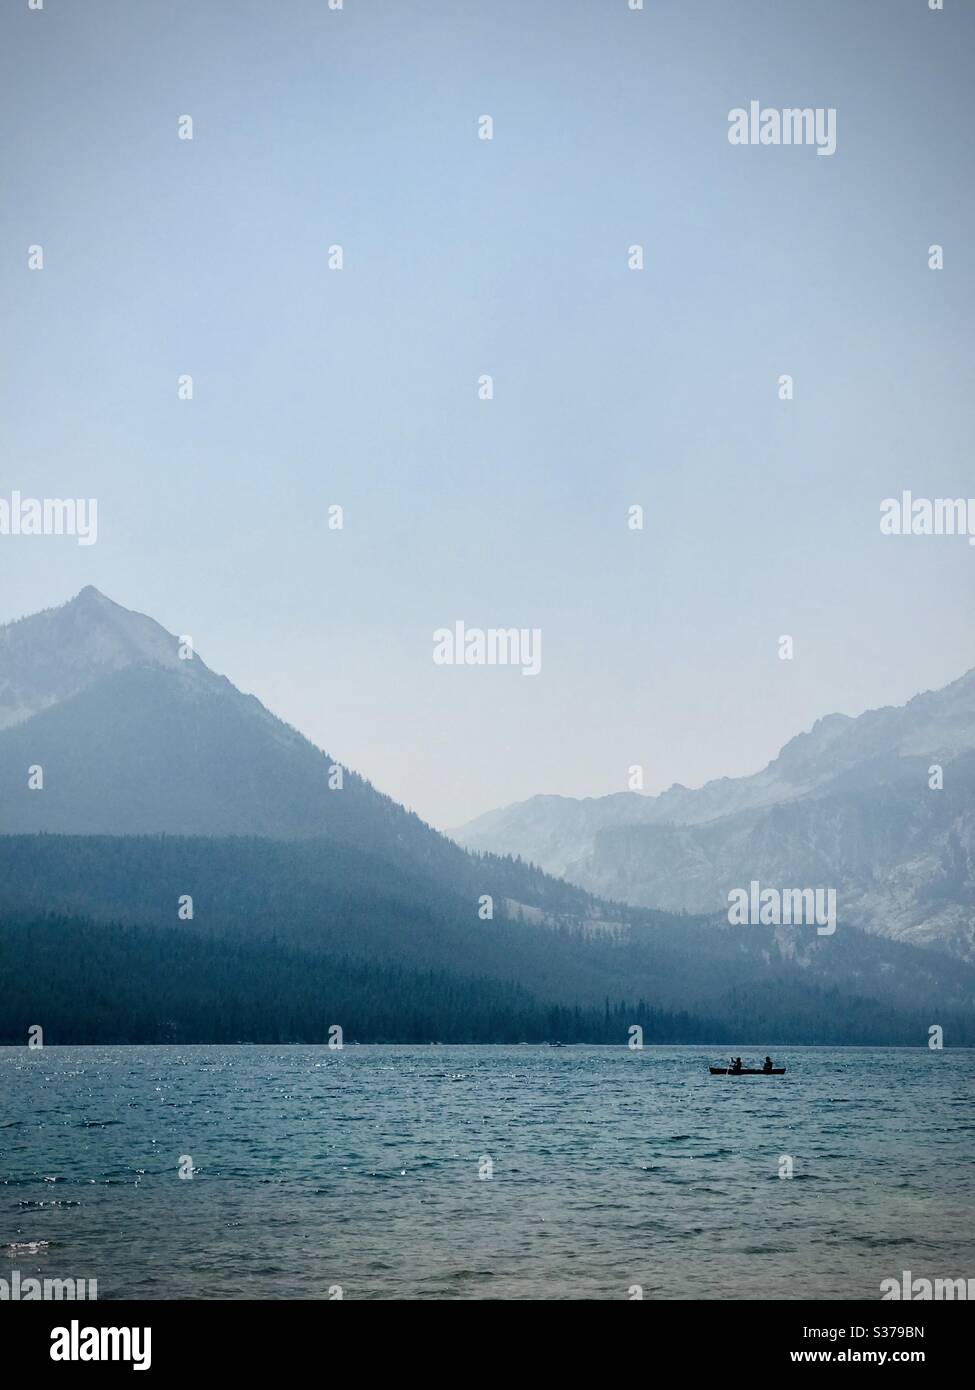 A kayaker riding across a scenic mountain lake in the northwest United States. Stock Photo